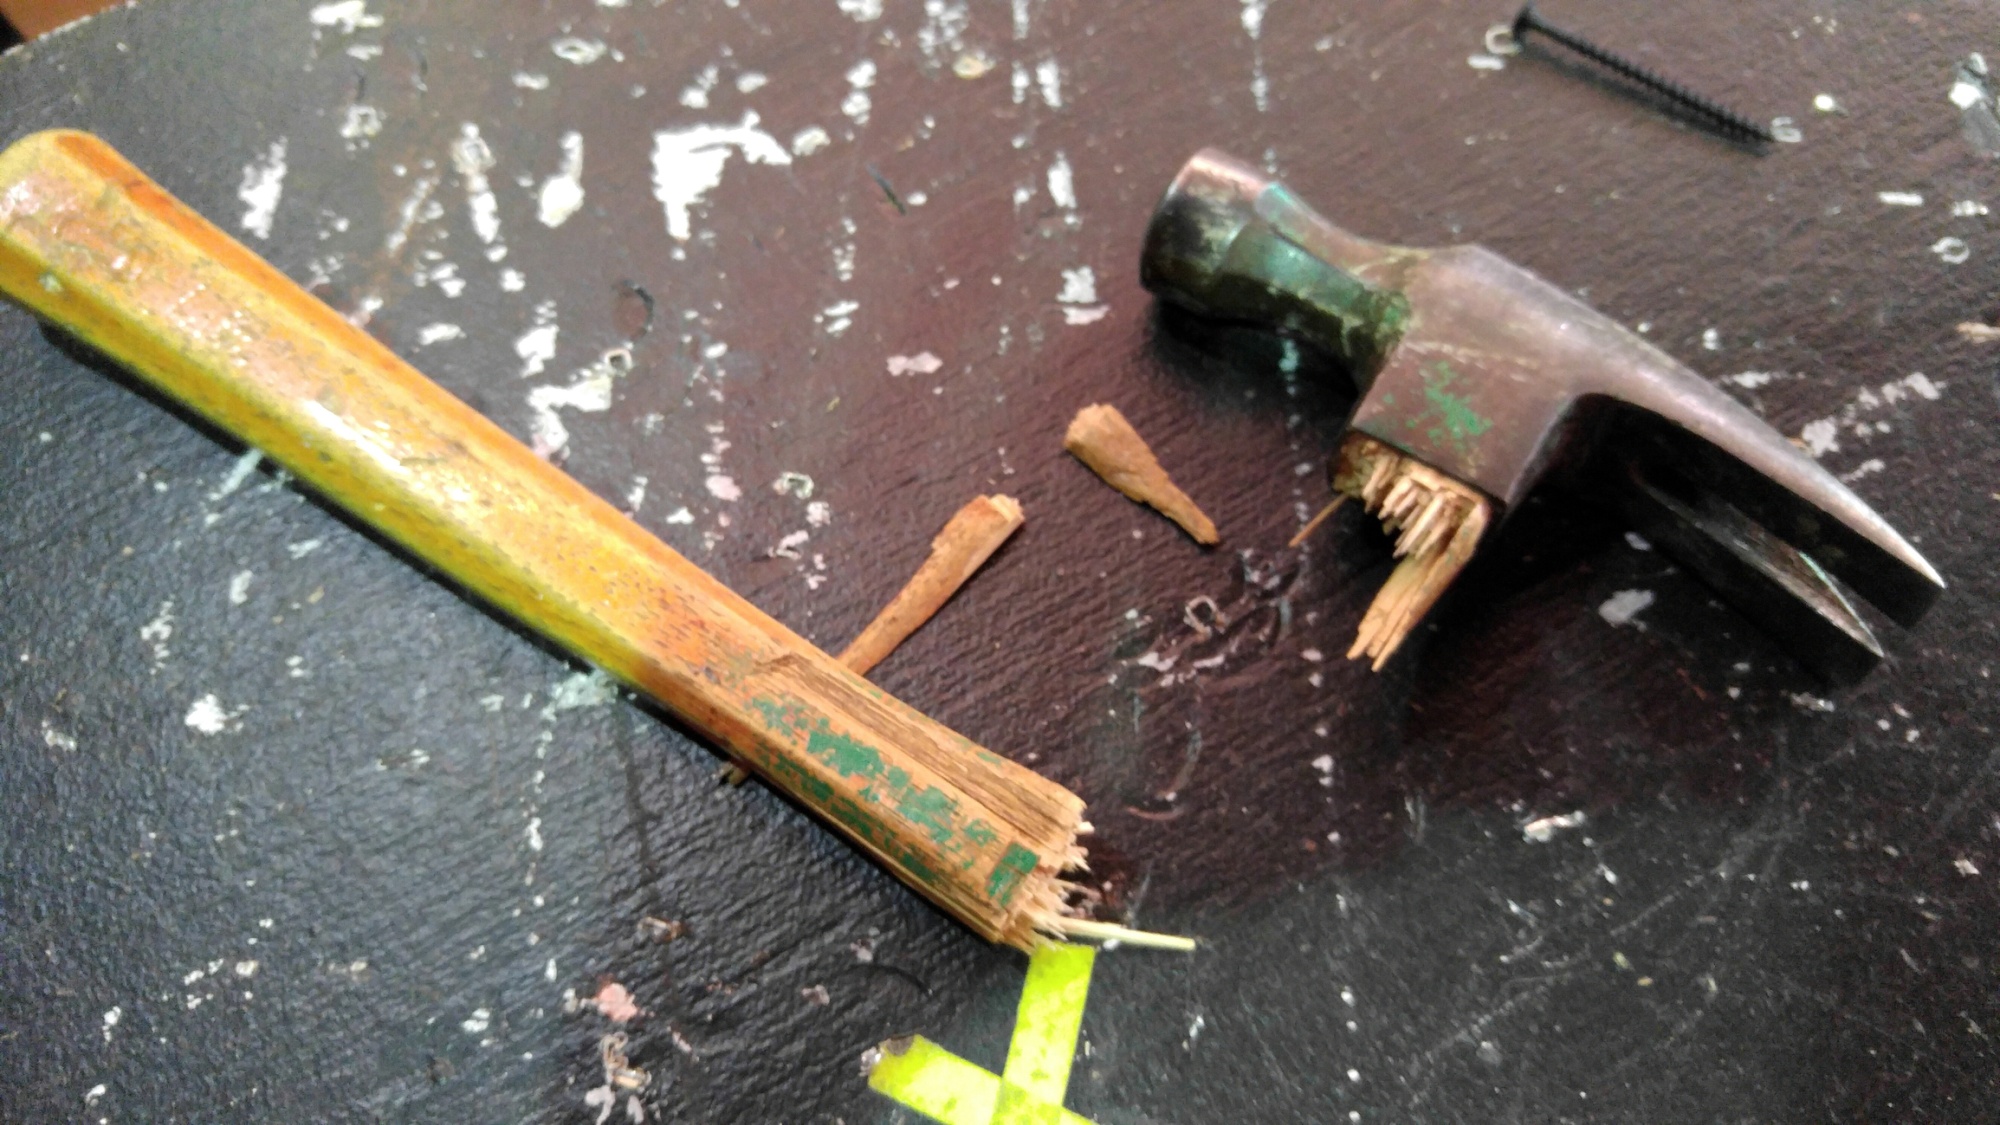 Broken tools can be repaired.